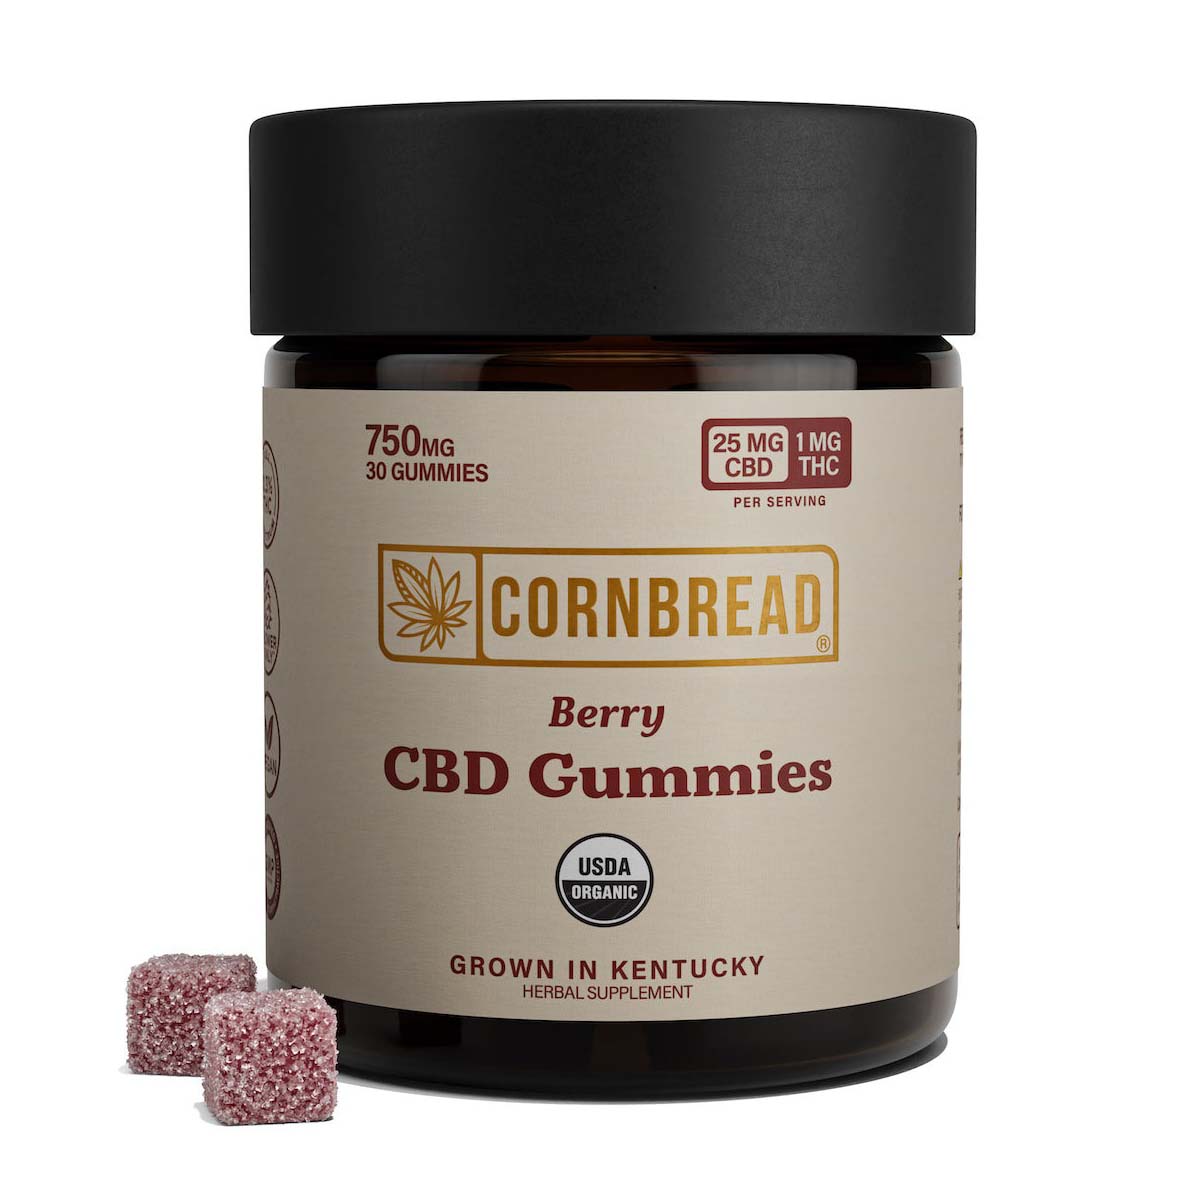 A bottle of Cornbread Berry CBD Gummies, with two of the gummies sitting next to it.